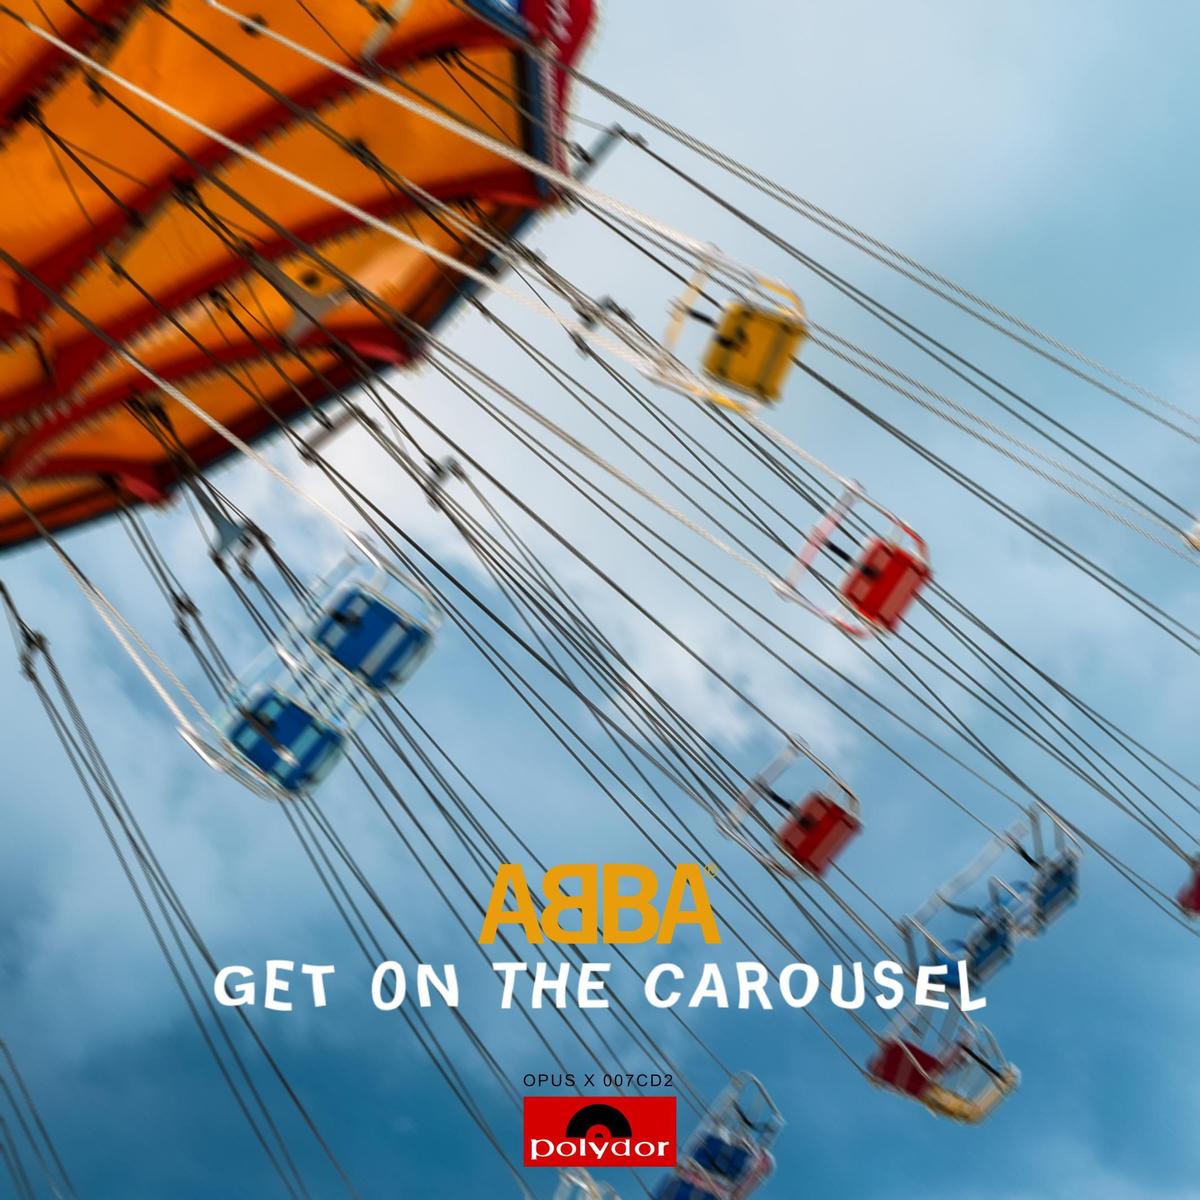 Get On The Carousel